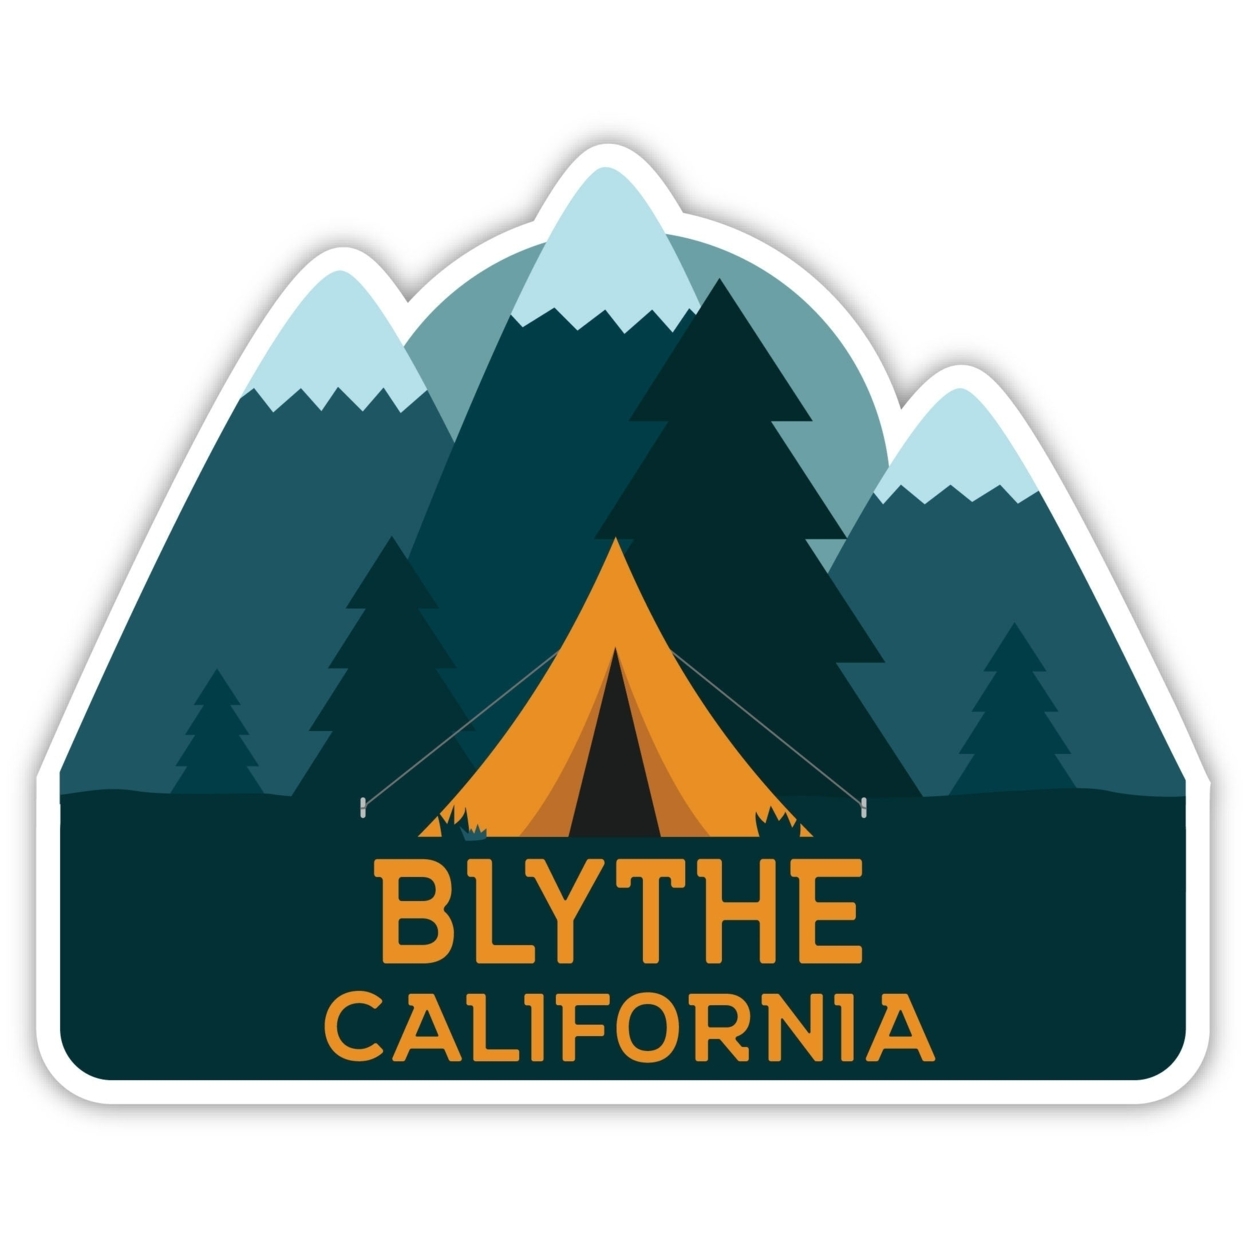 Blythe California Souvenir Decorative Stickers (Choose Theme And Size) - 4-Pack, 12-Inch, Tent